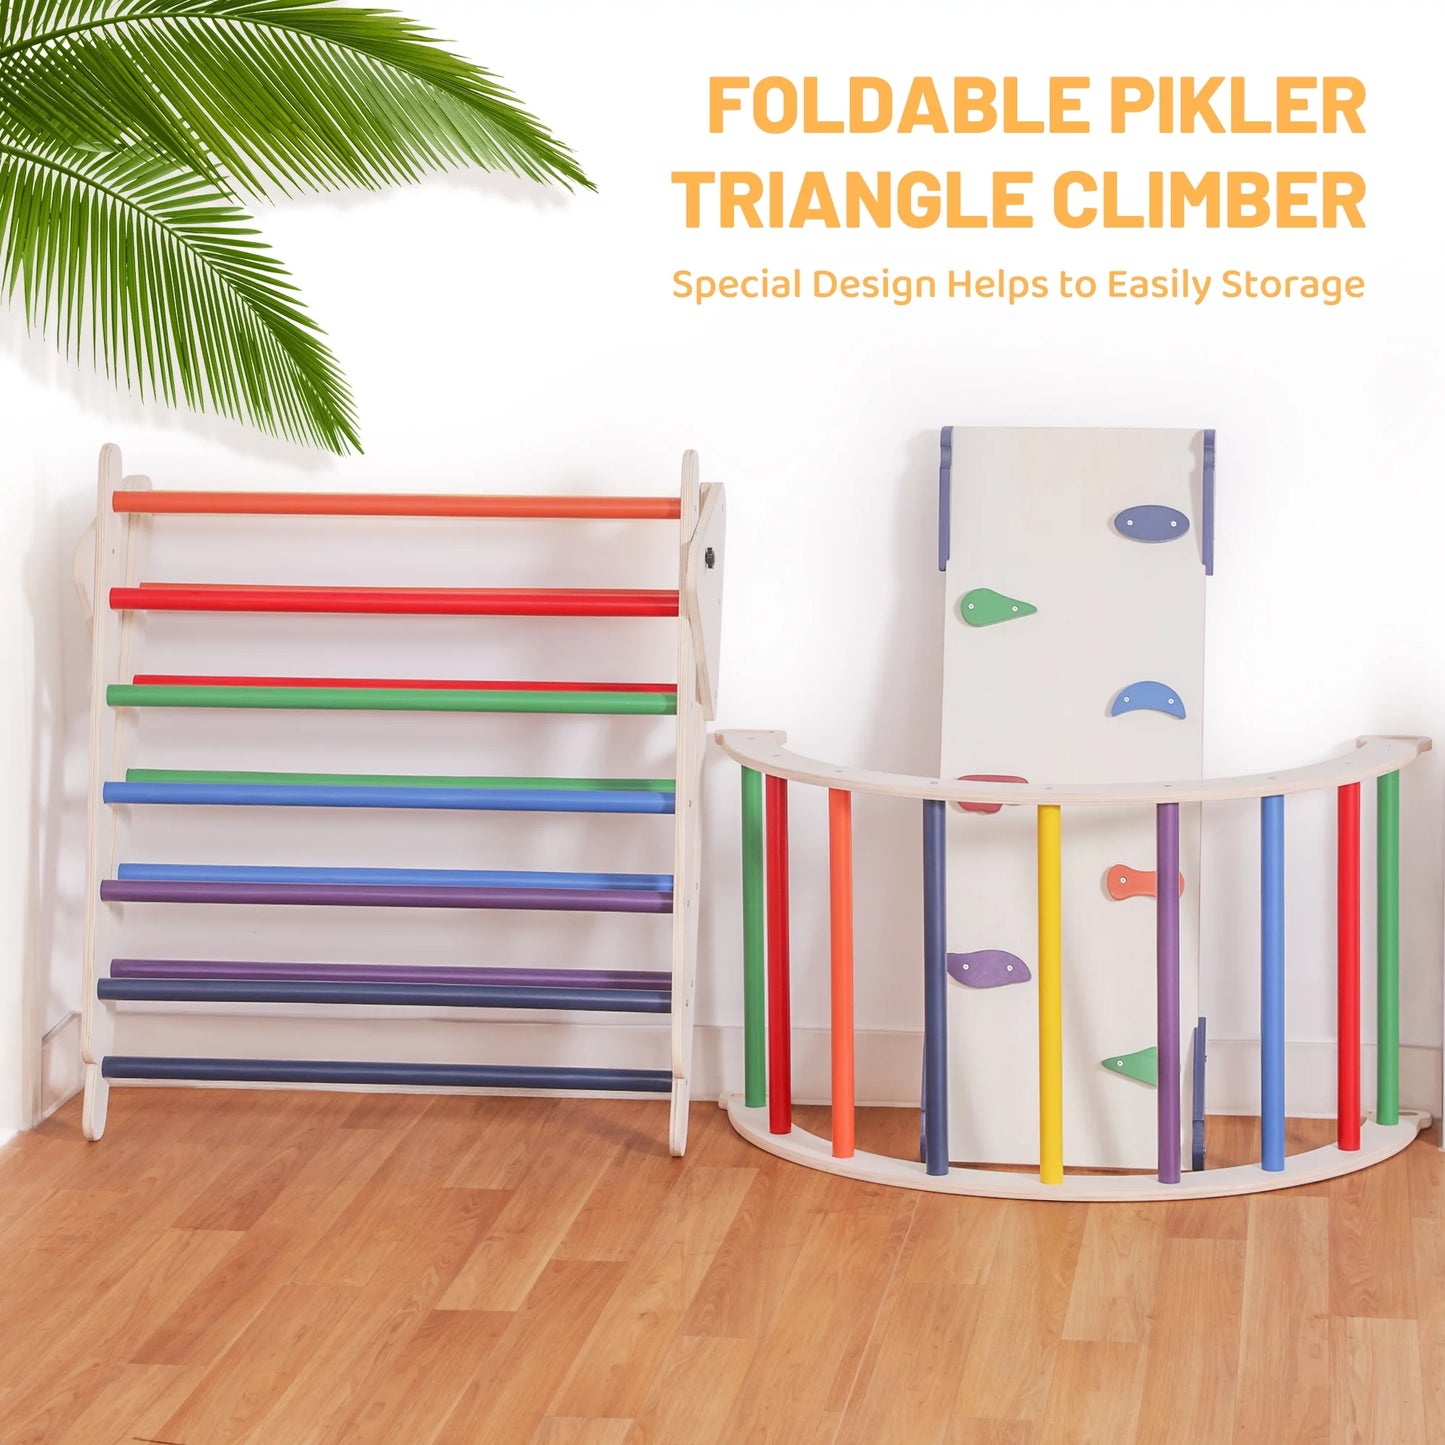 4-in-1 Wooden Pikler Climbing Triangle Foldable Pikler Triangle Ladder with Rock Climbing Ramp and Pikler Arch,Montessori Climber Ladder Slide,Playground for Toddlers and Kids 18m-6yrs